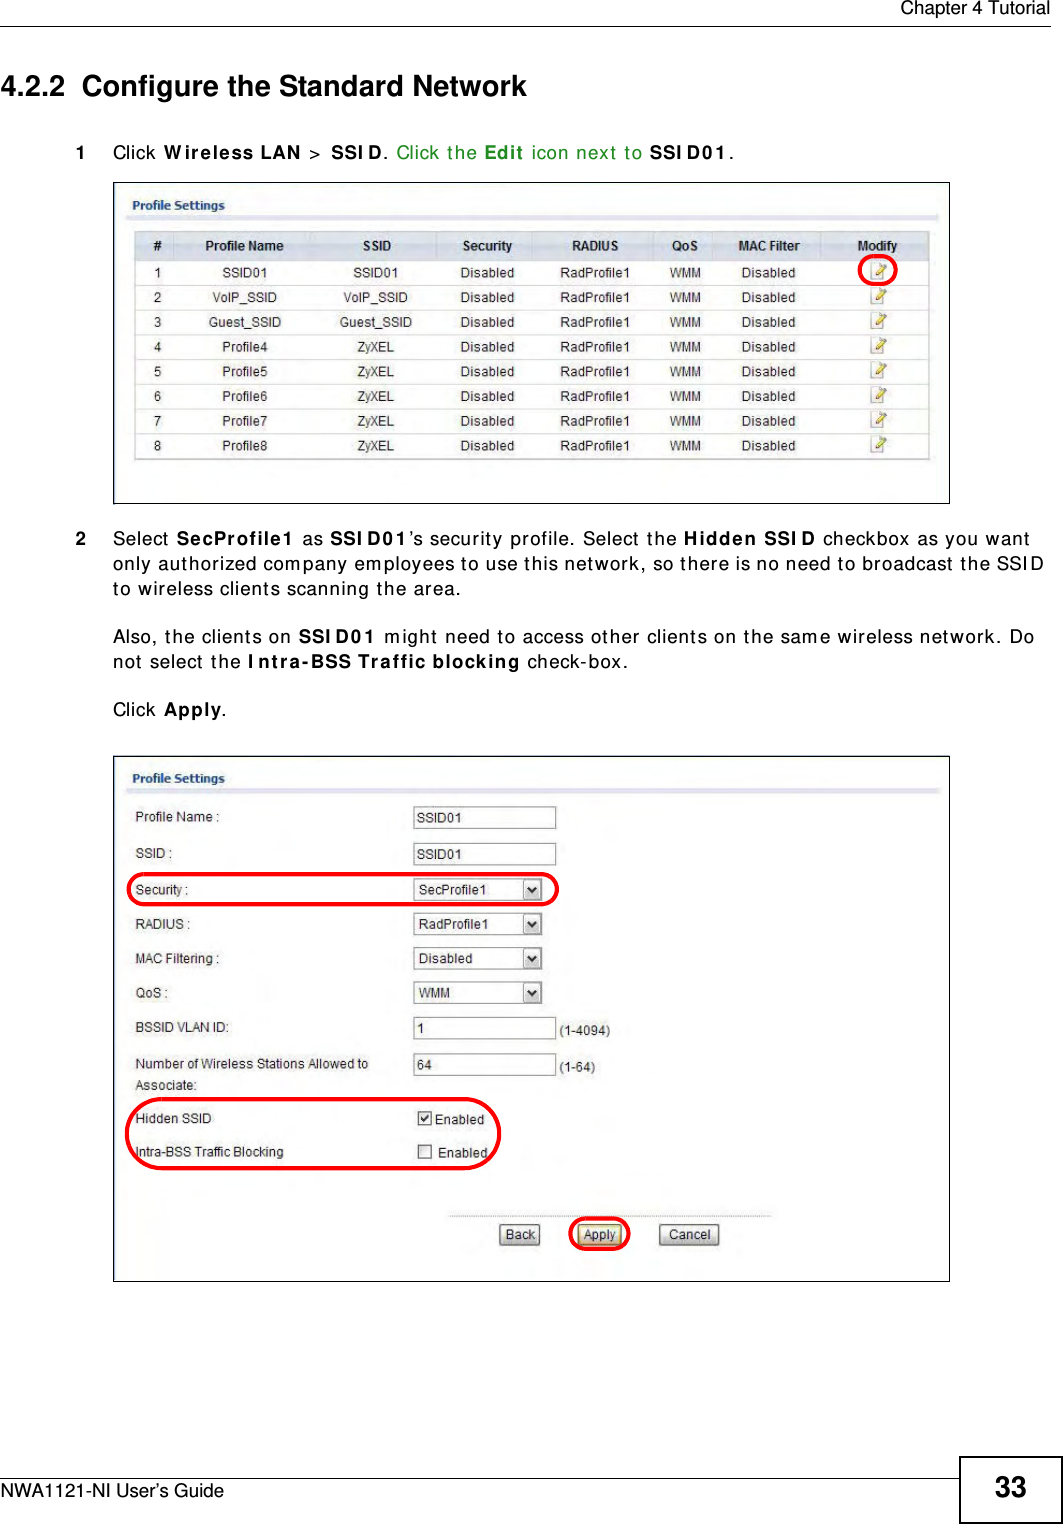  Chapter 4 TutorialNWA1121-NI User’s Guide 334.2.2  Configure the Standard Network1Click Wireless LAN &gt; SSID. Click the Edit icon next to SSID01. 2Select SecProfile1 as SSID01’s security profile. Select the Hidden SSID checkbox as you want only authorized company employees to use this network, so there is no need to broadcast the SSID to wireless clients scanning the area. Also, the clients on SSID01 might need to access other clients on the same wireless network. Do not select the Intra-BSS Traffic blocking check-box. Click Apply.